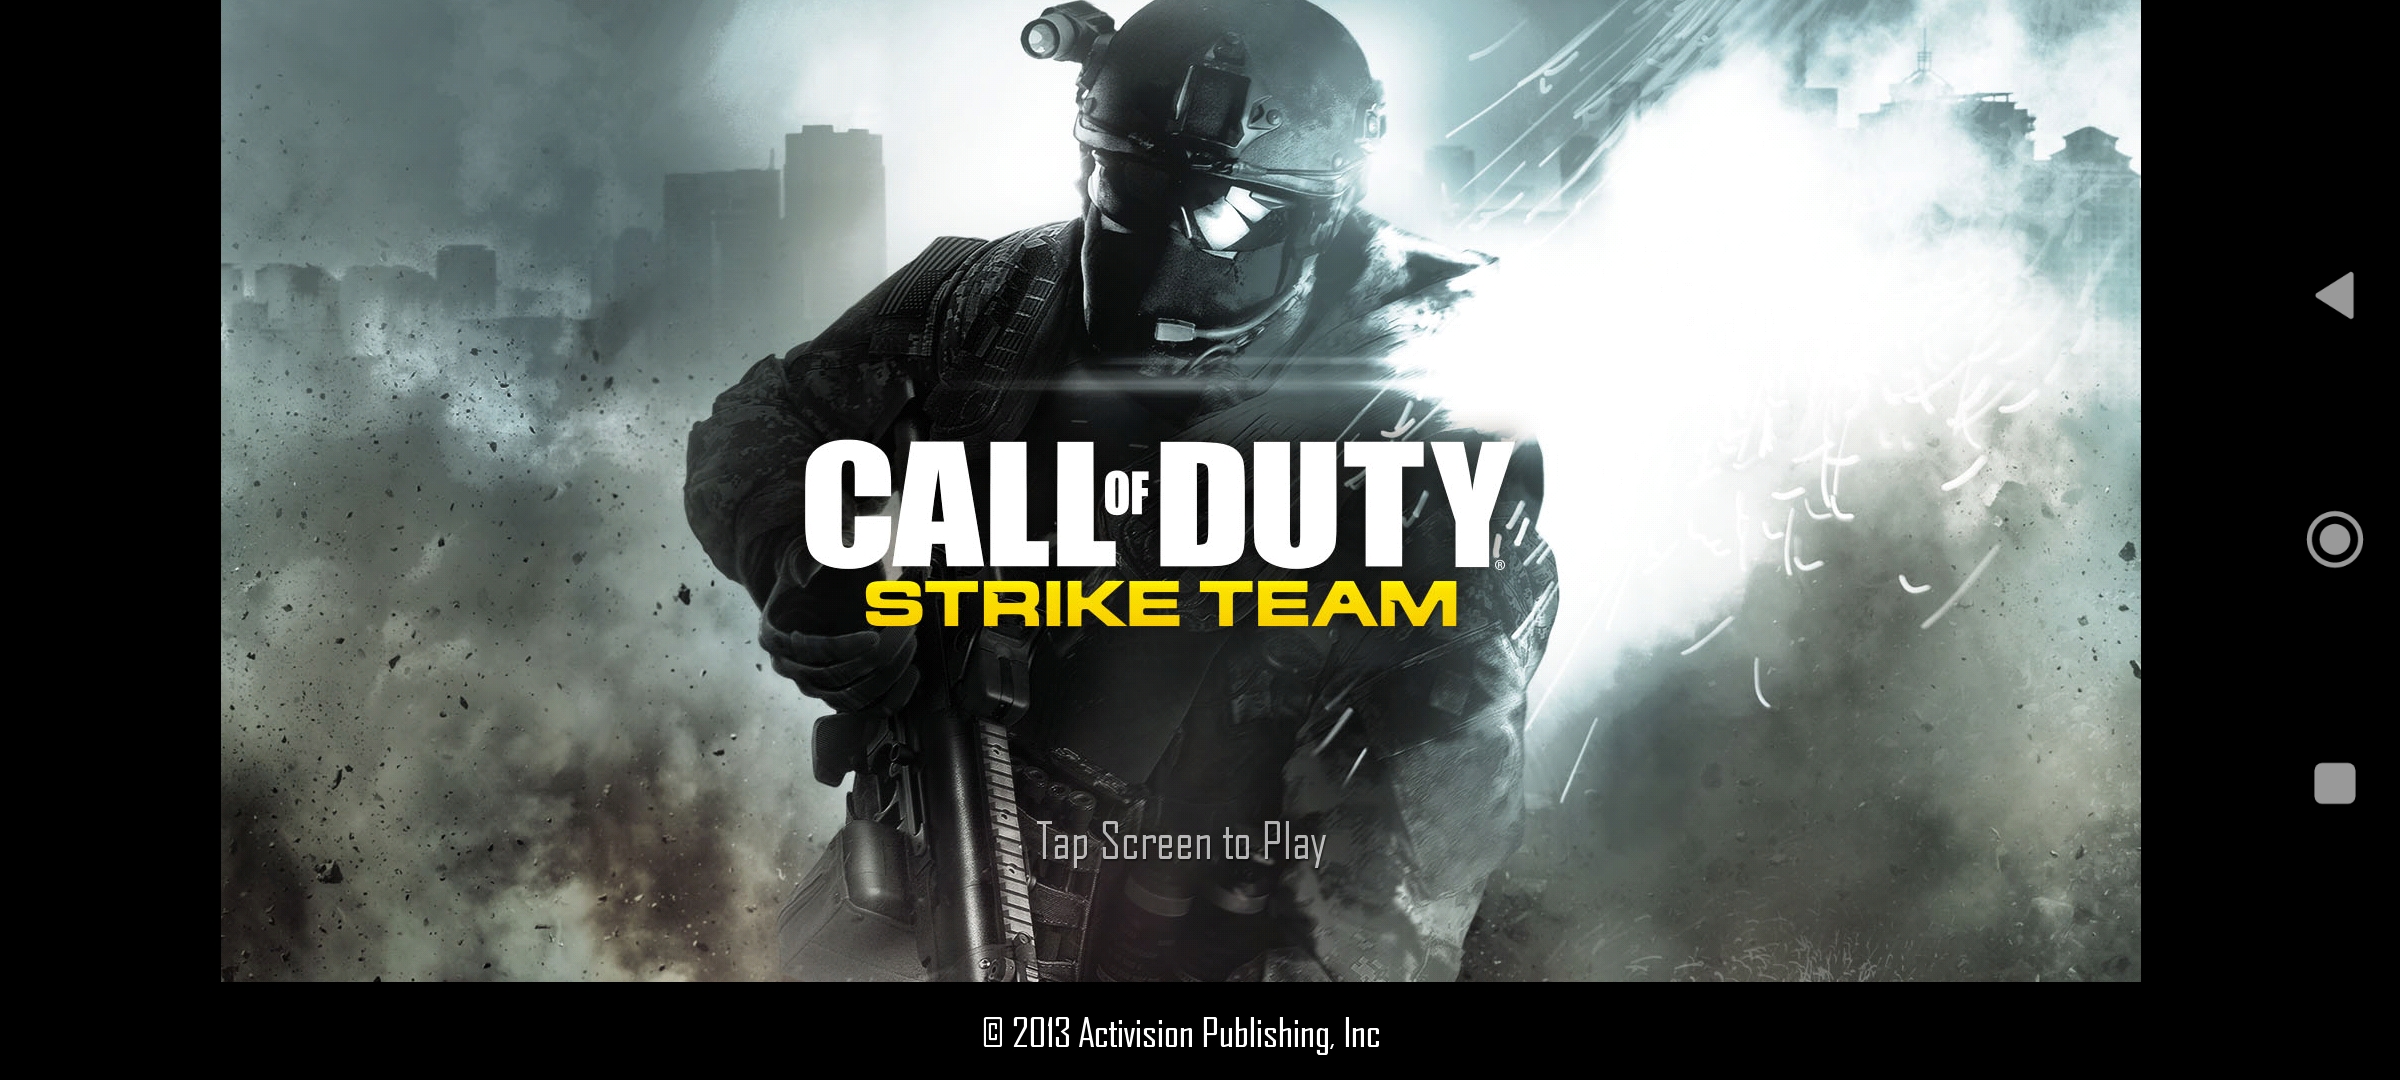 [Game Android] Call of Duty: Strike Team